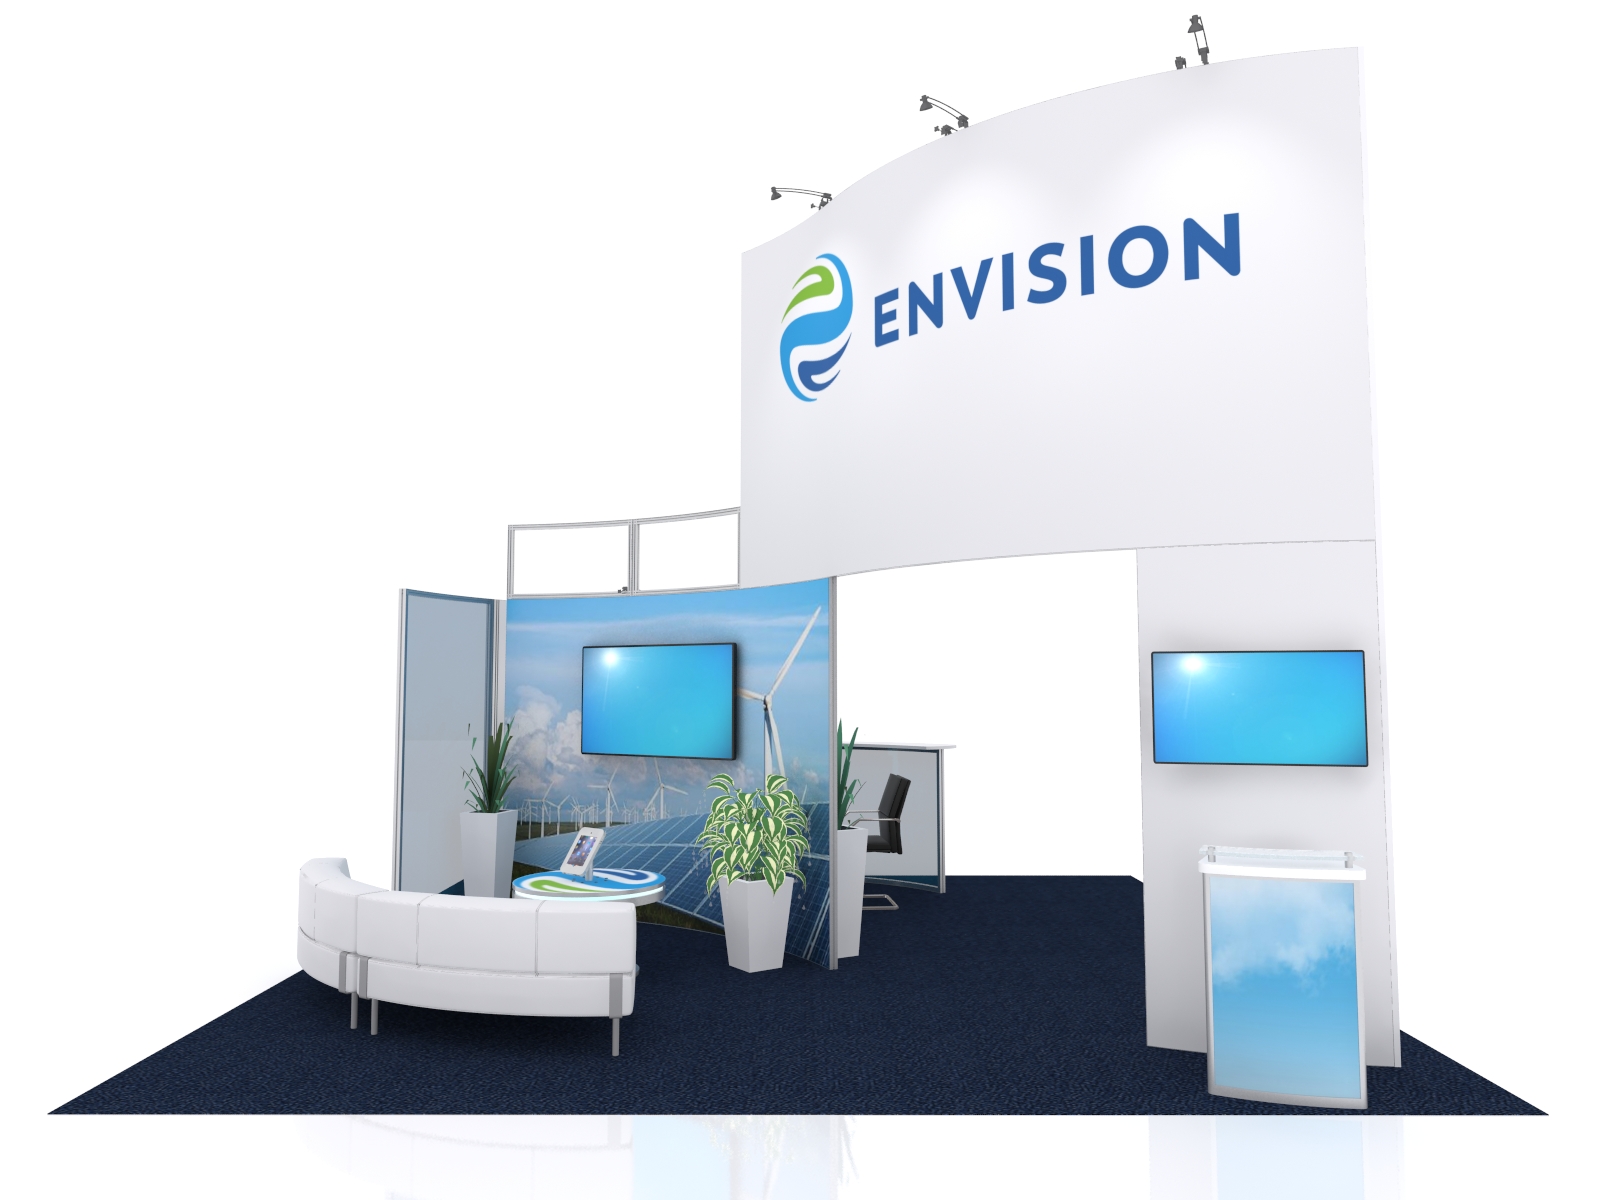 trade show booth ideas to attract visitors